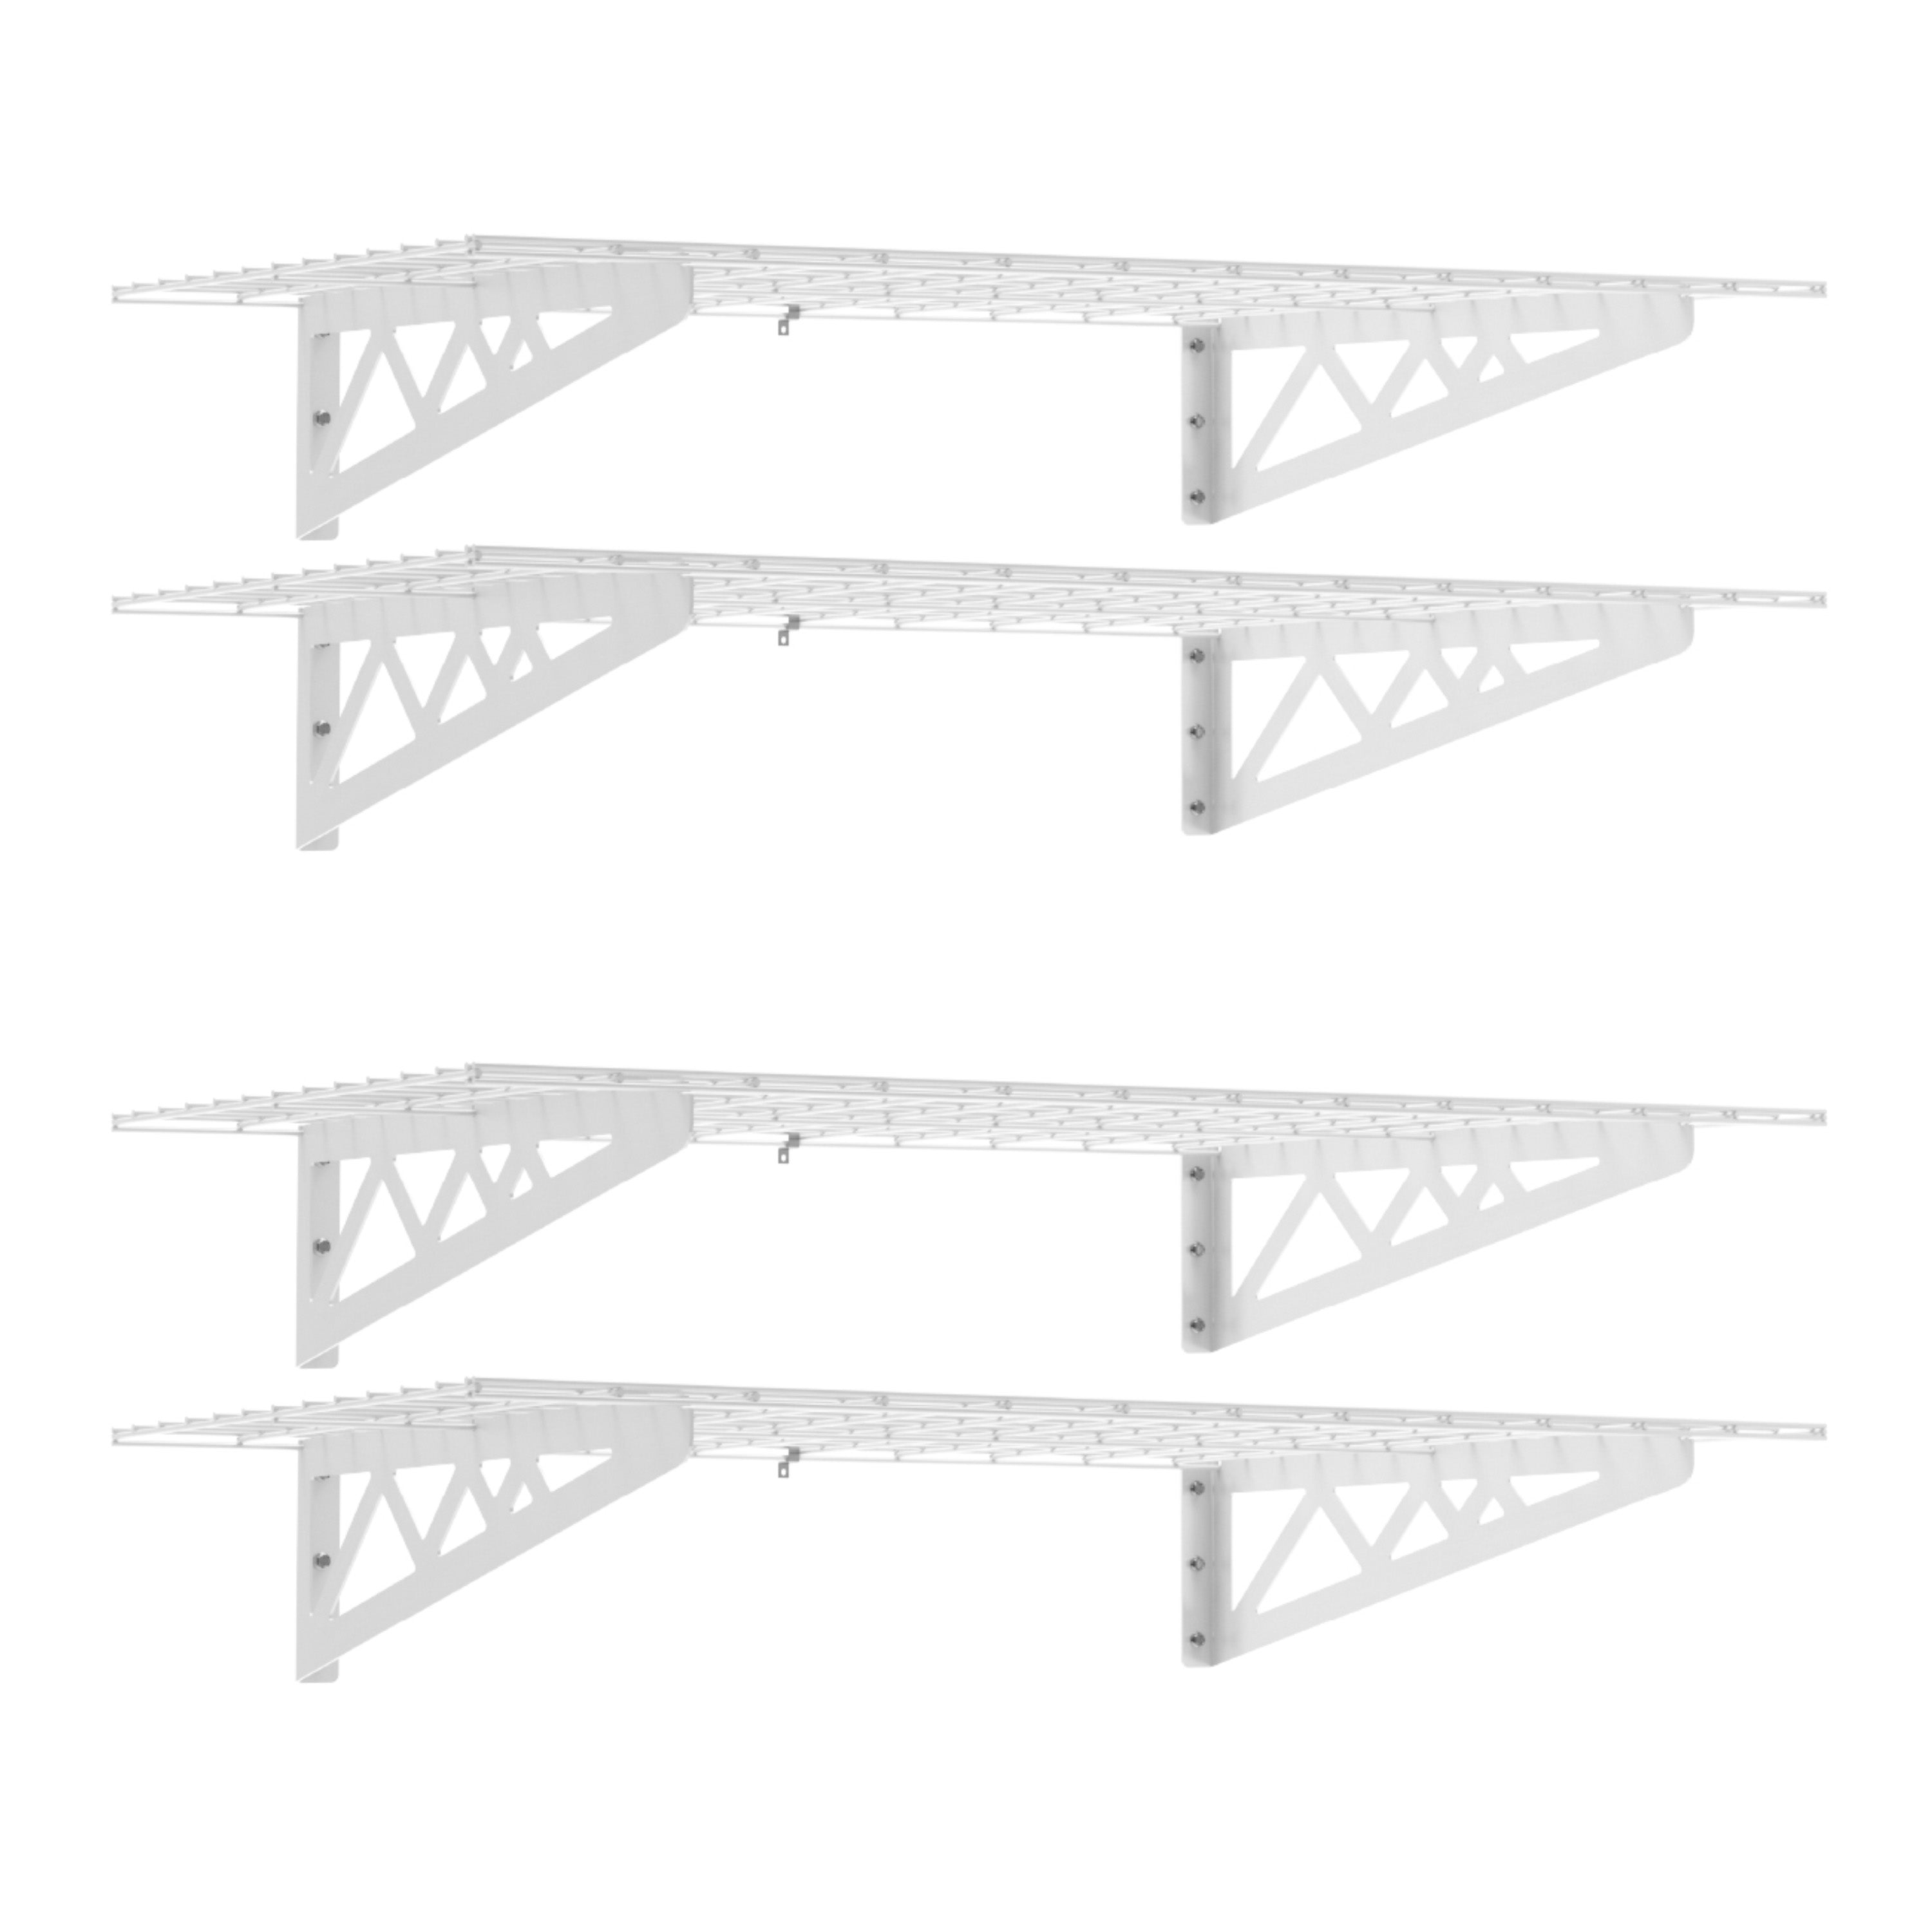 24’ x 48’ Wall Shelves Combo (Four Pack with Hooks)